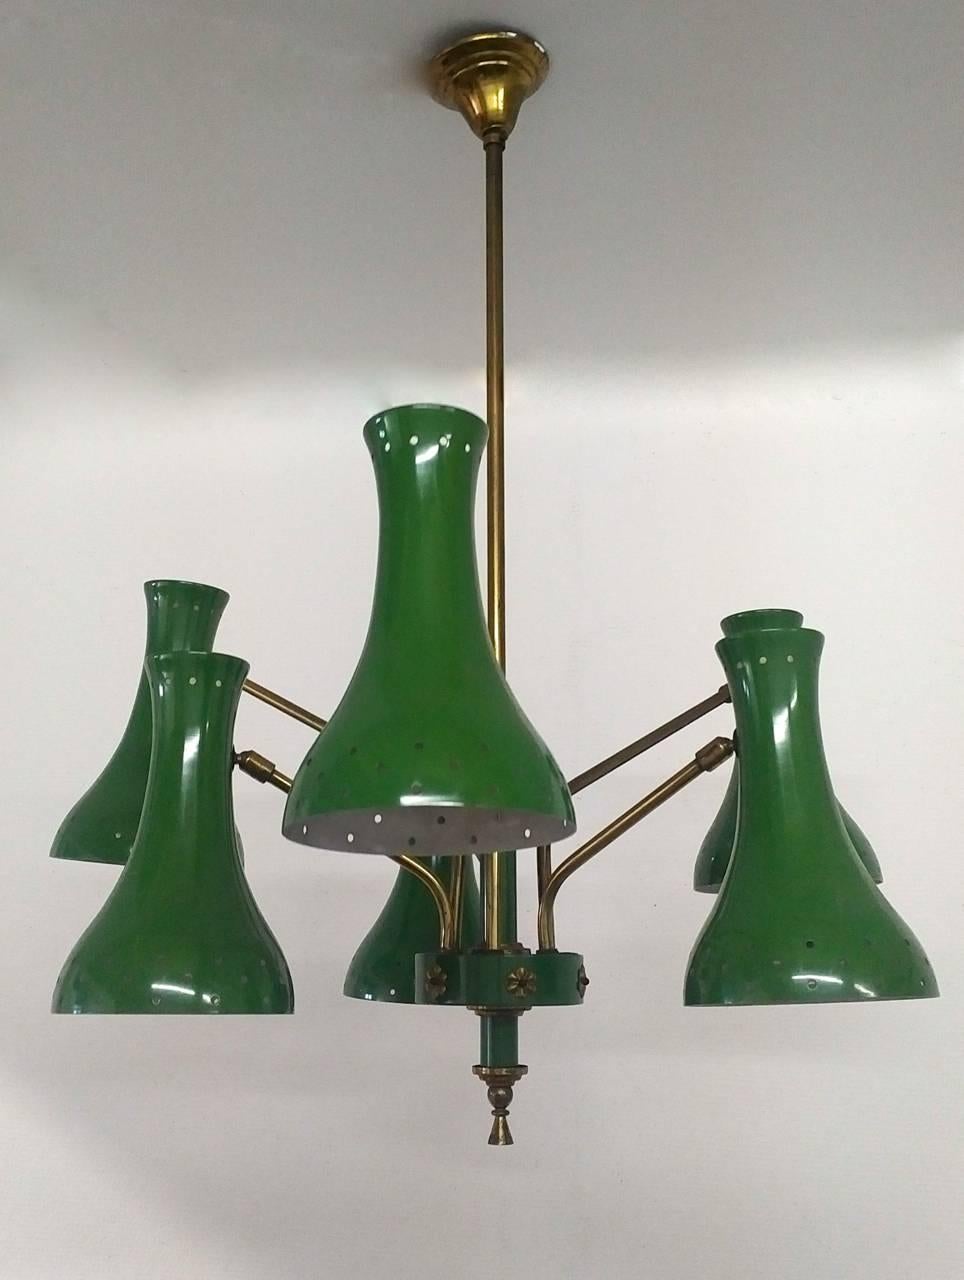 A six-arm chandelier in typical Italian Mid-Century green with diabolo shaped diffusers and circle perforated rims that spread the light across the room. Brass suspension and details. The arms that have two lengths create a double tier effect and